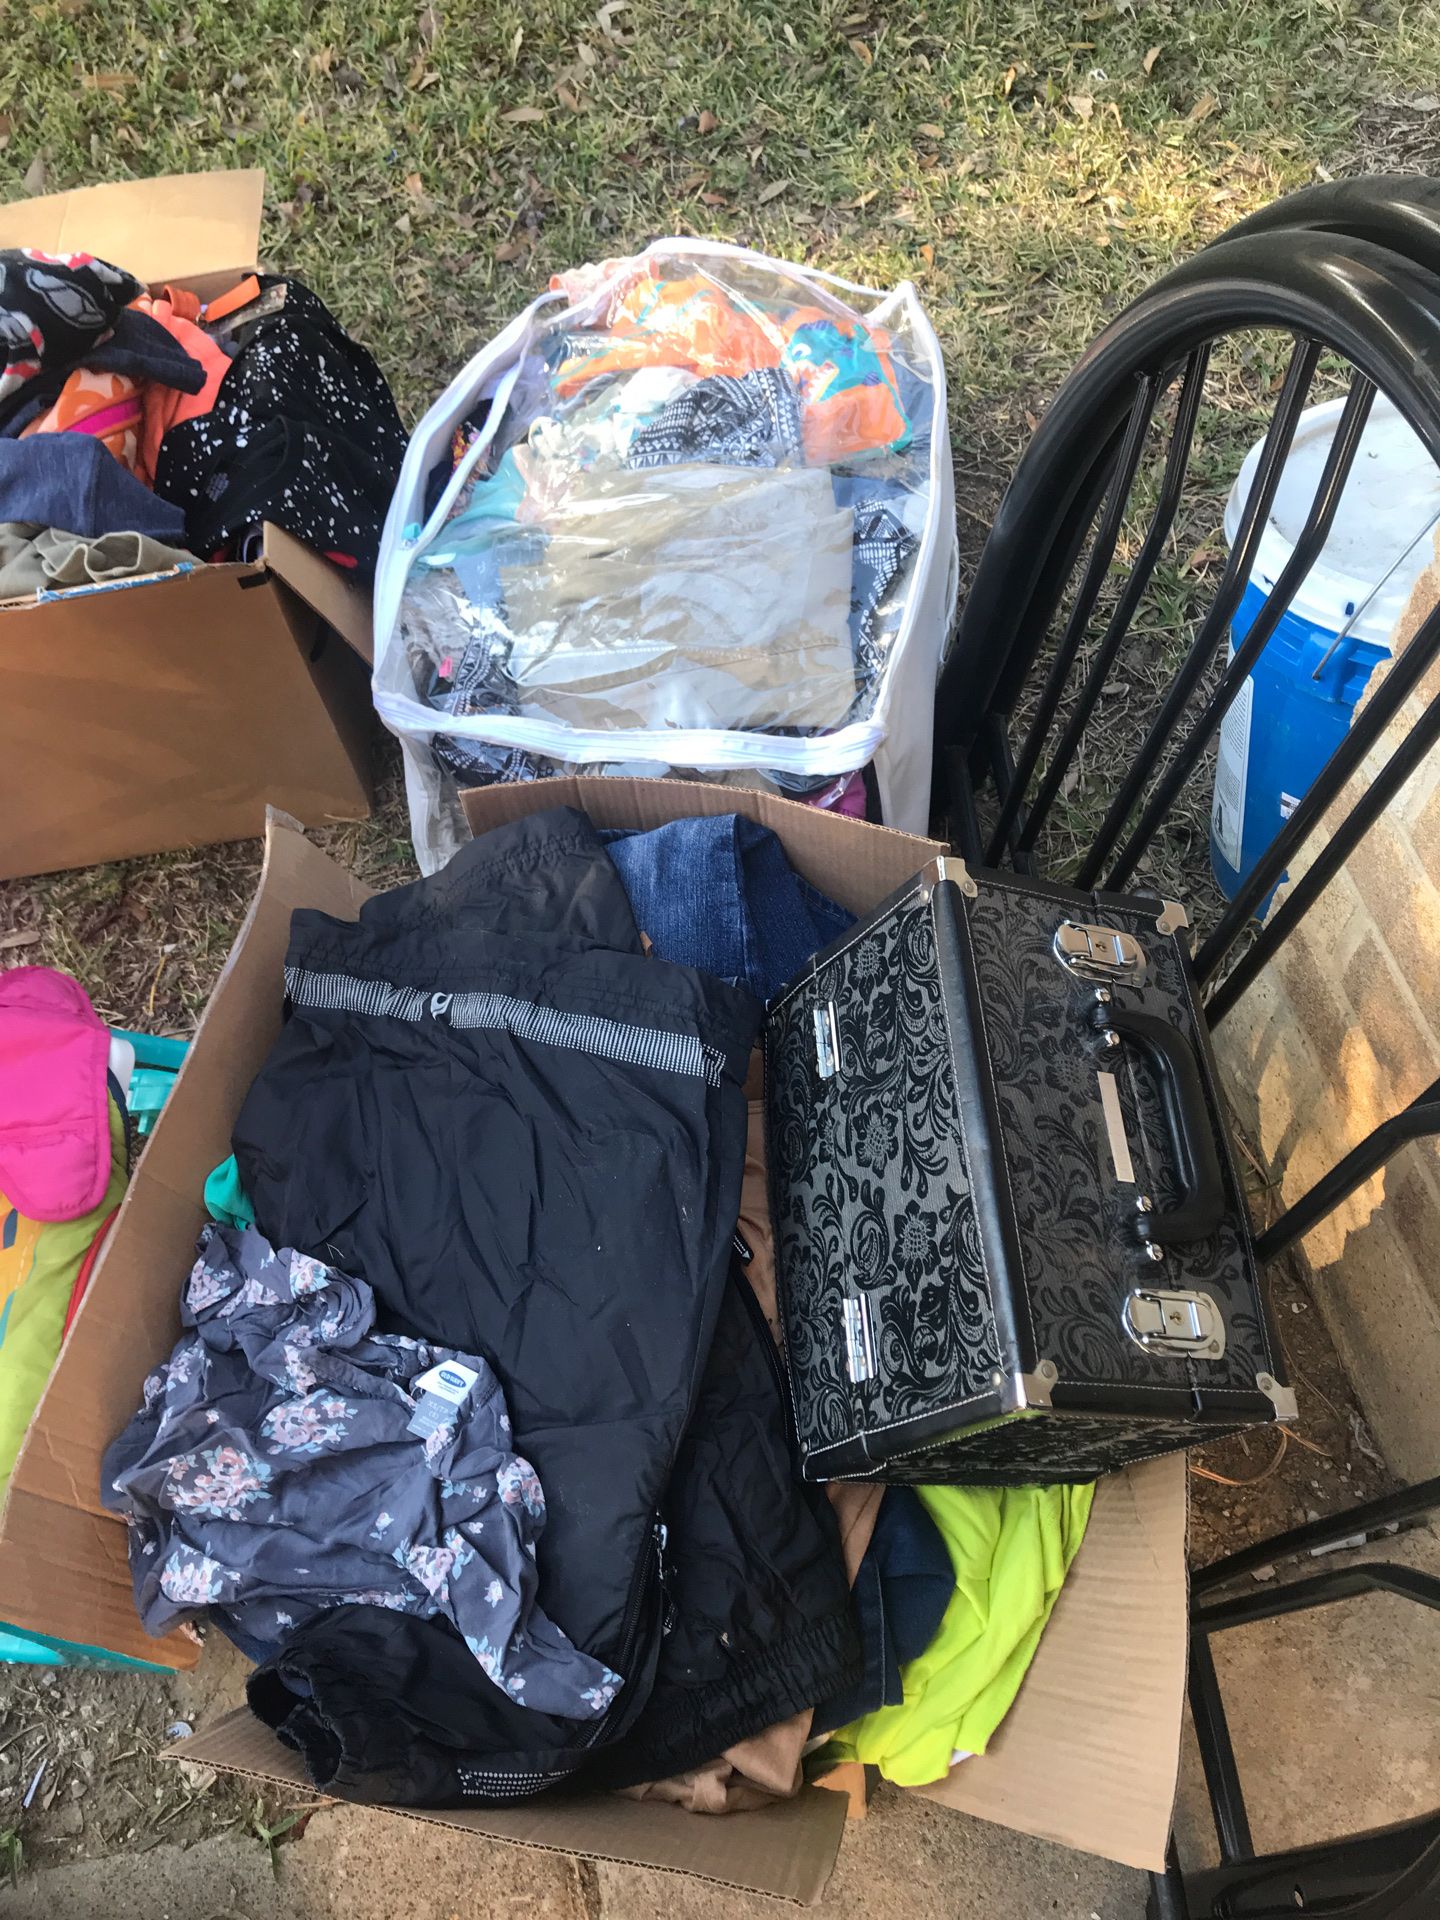 Clothes and baby items